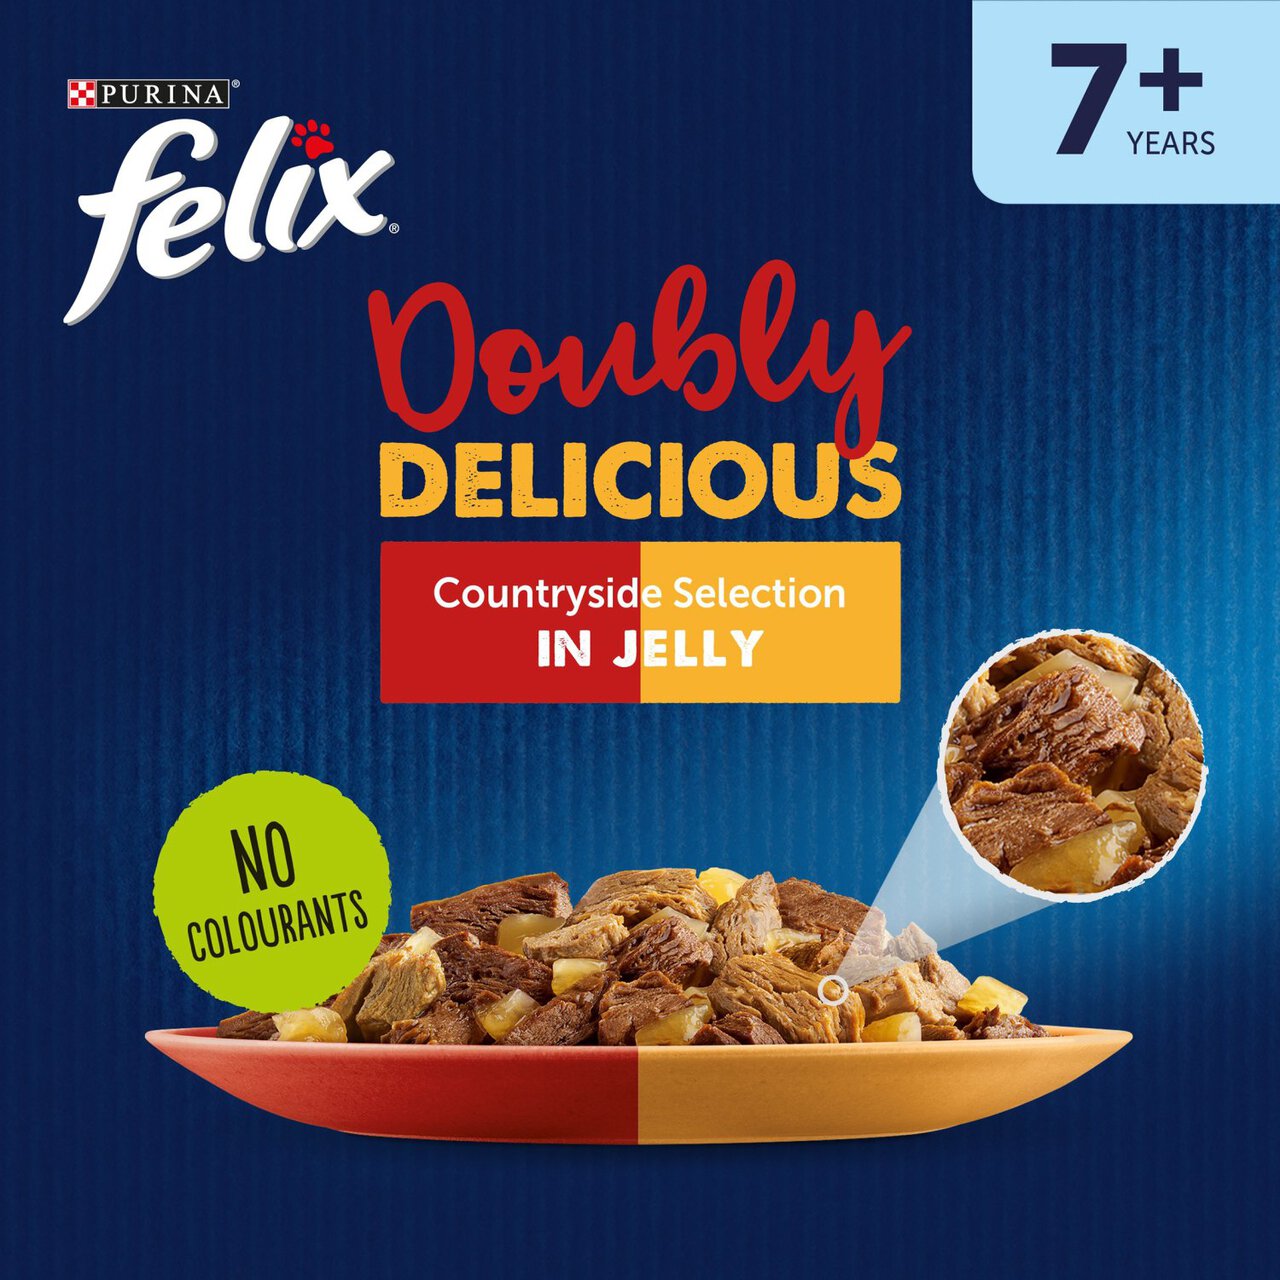 Felix As Good As It Looks Doubly Delicious Senior Cat Food Meat 12 x 100g